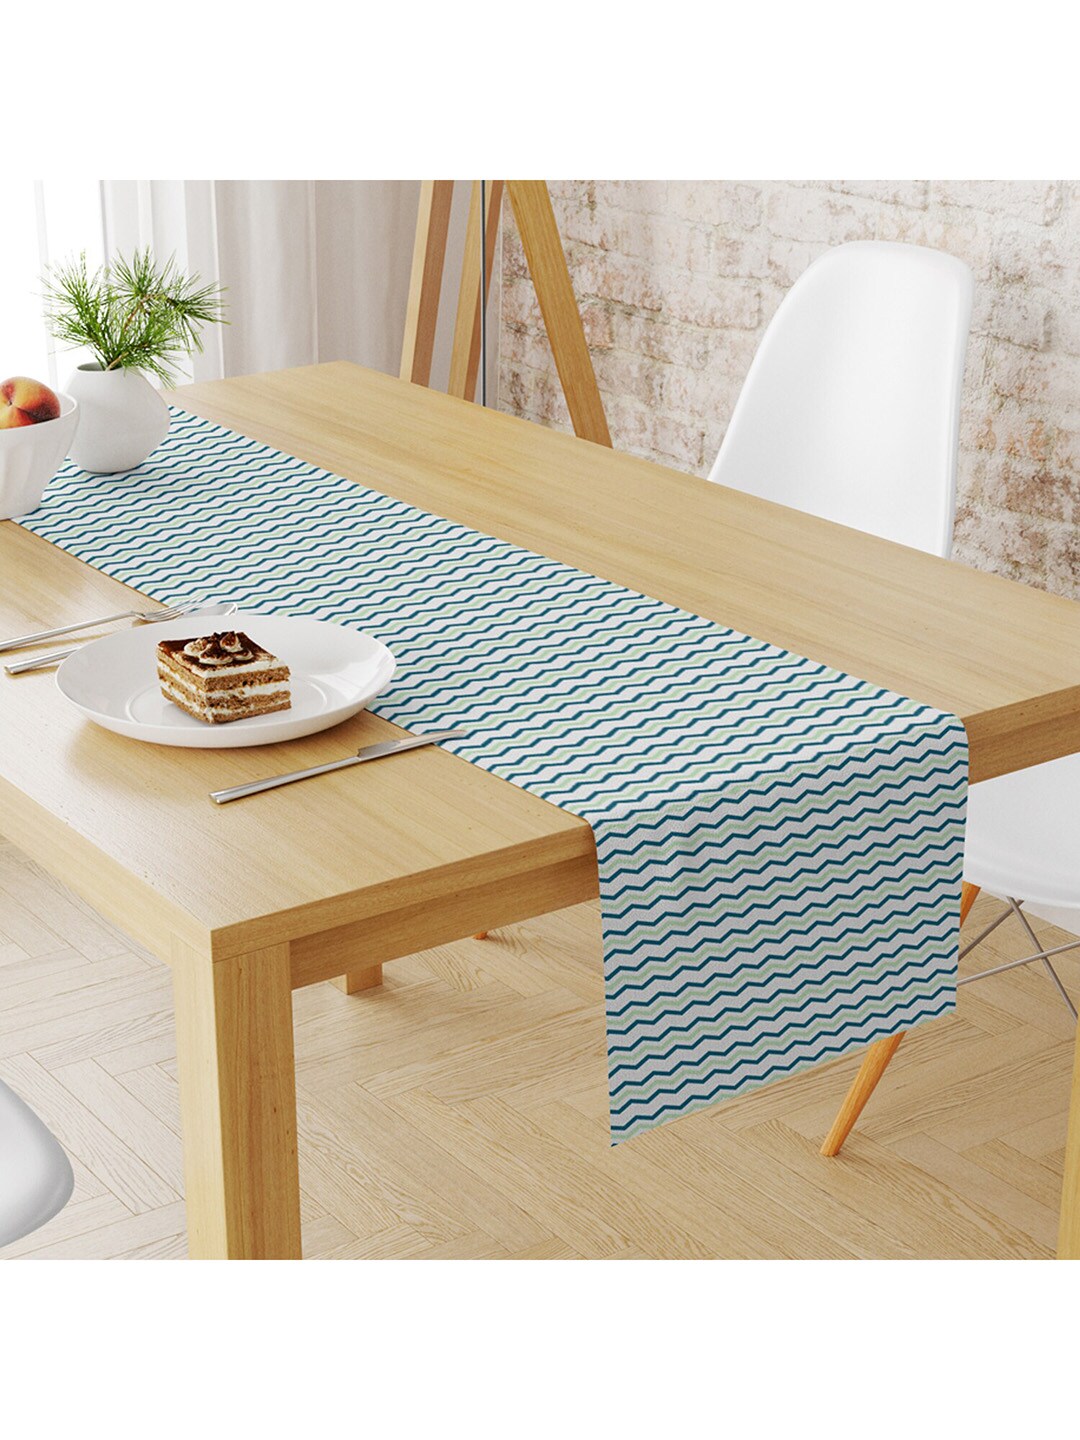 STYBUZZ White & Blue Geometric Printed Table Runner Price in India